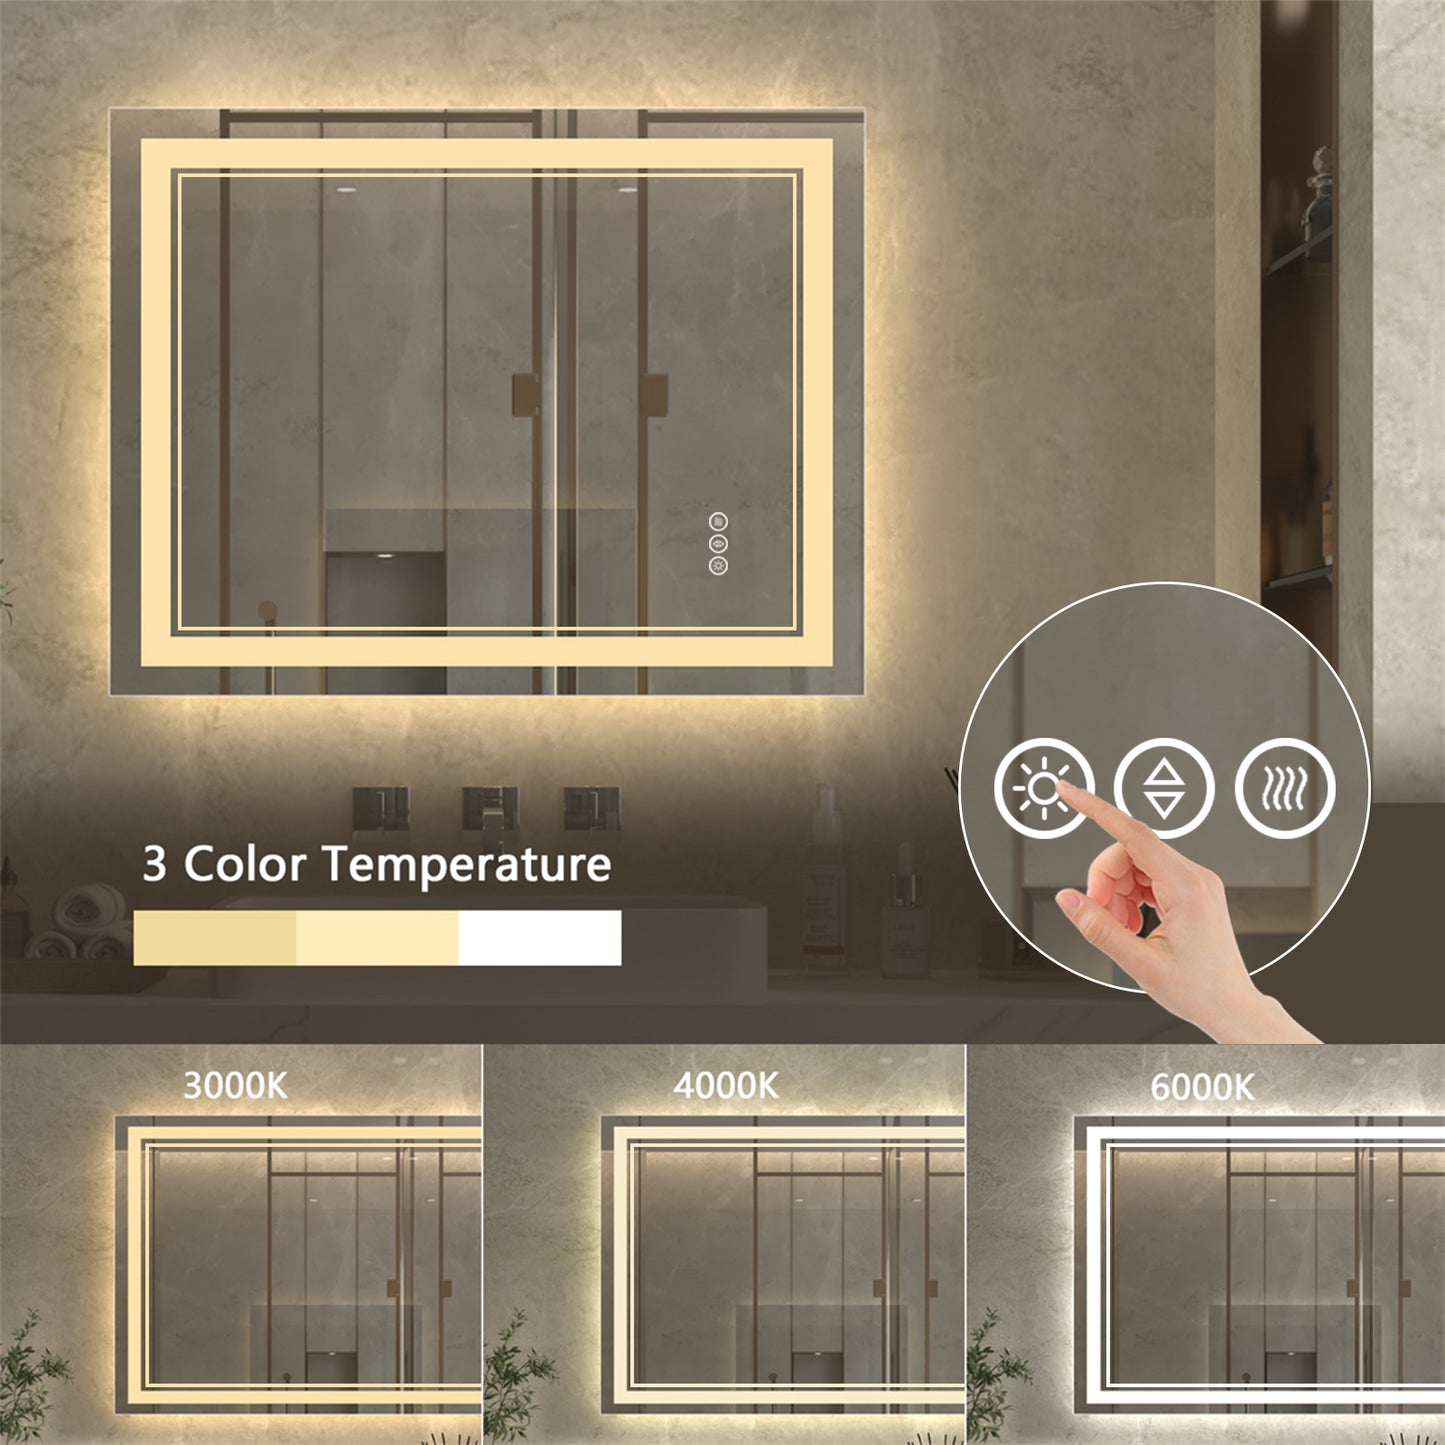 Linea 28" W x 36" H LED Heated Bathroom Mirror,Anti Fog,Dimmable,Front-Lighted and Backlit, Tempered Glass